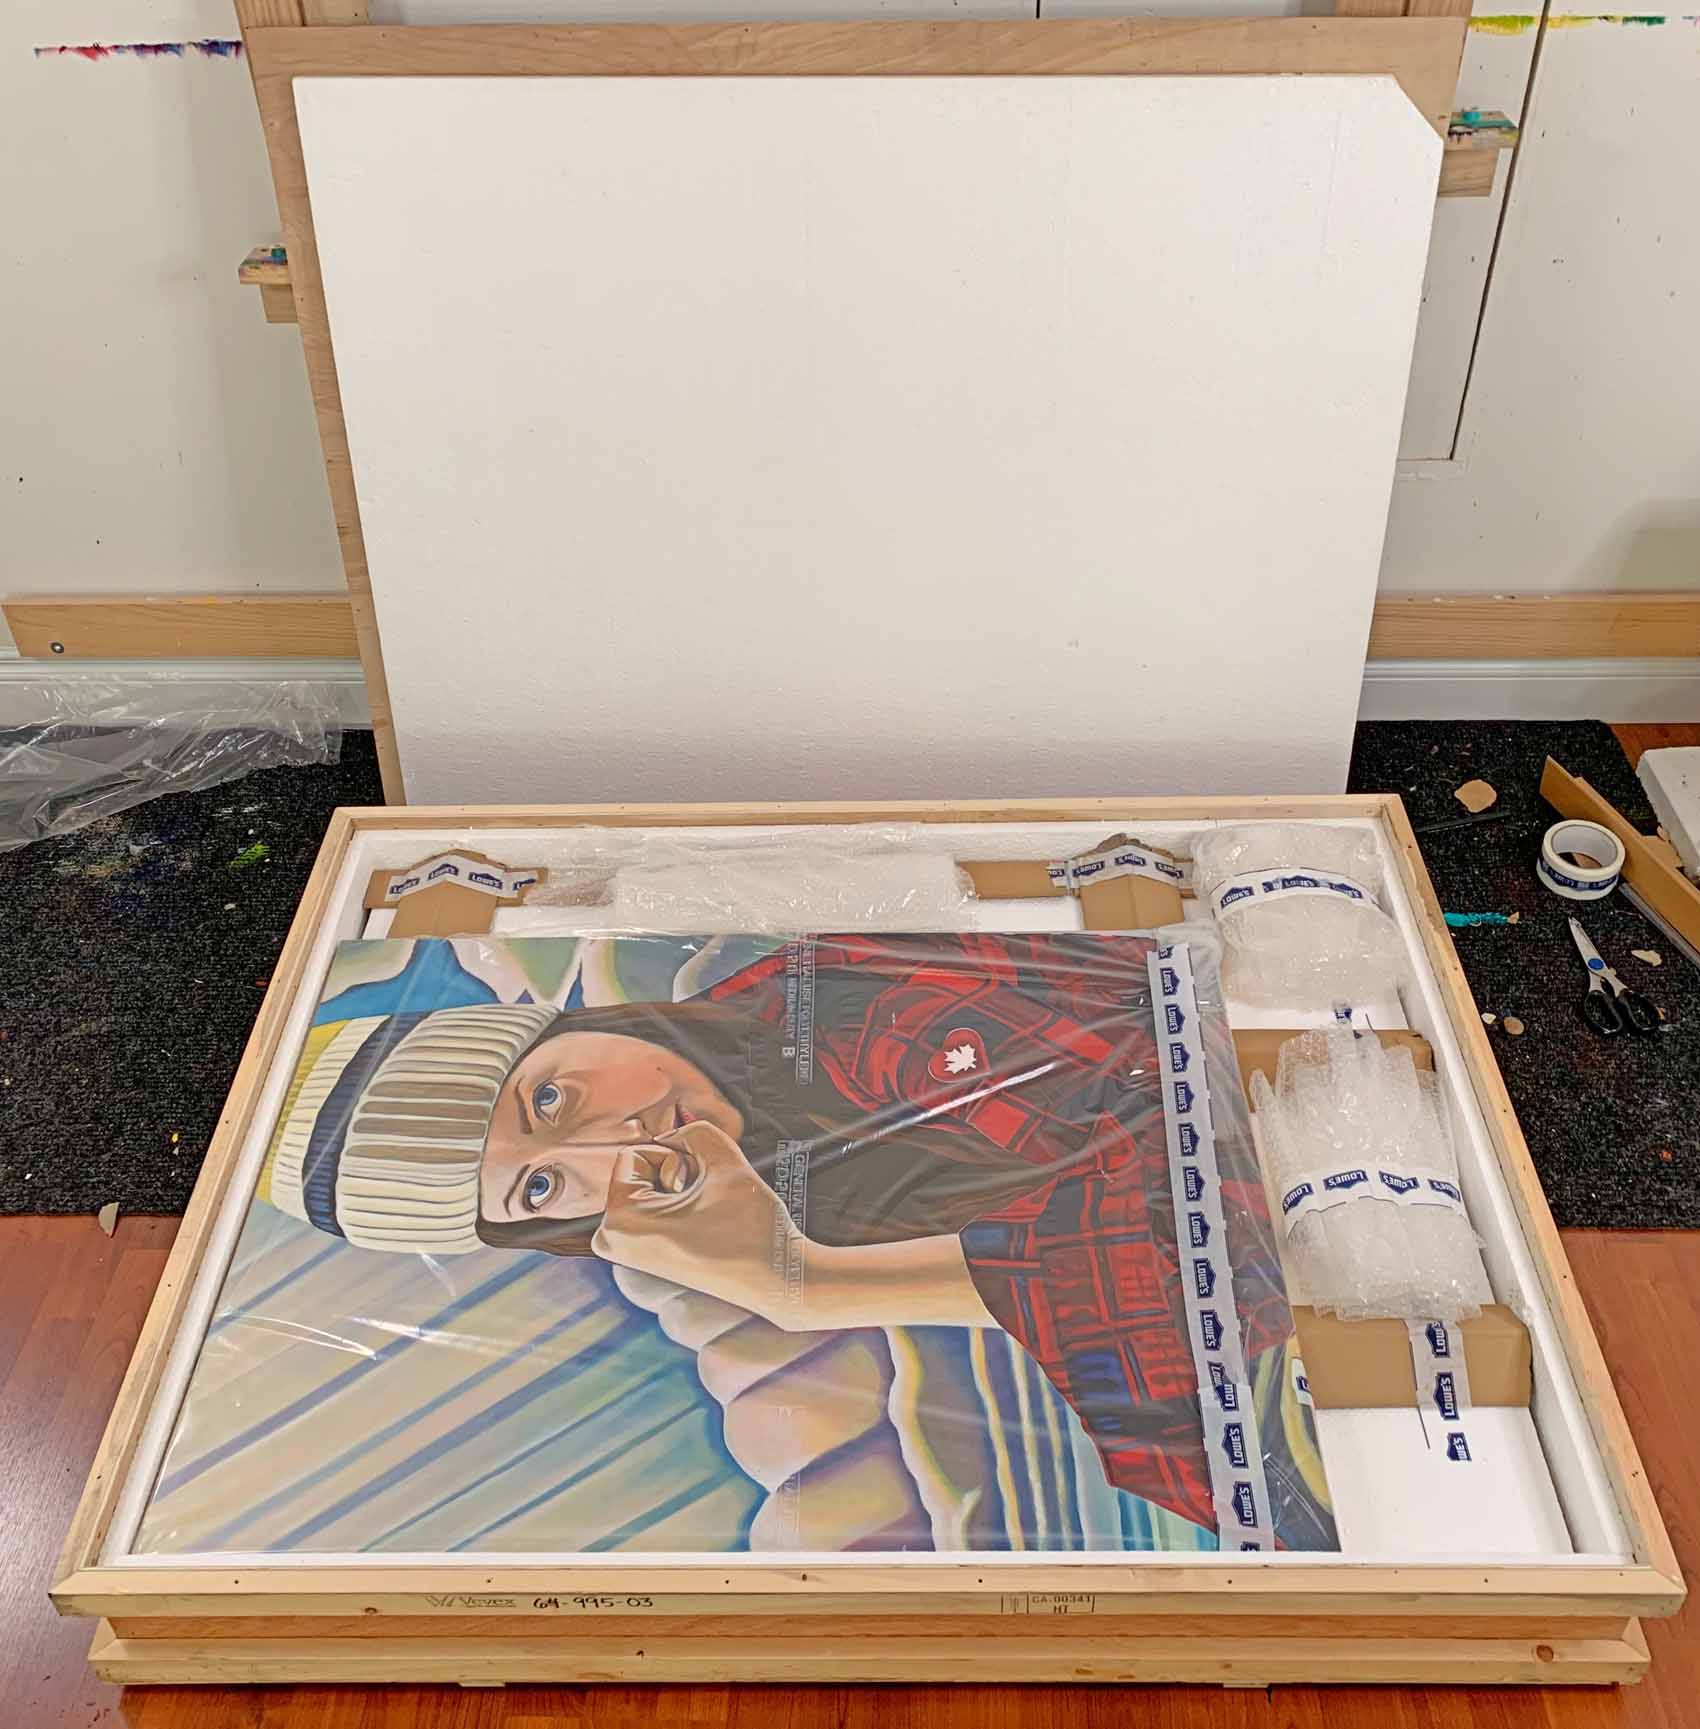 art shipping packing crates with paintings - Brandy Saturley